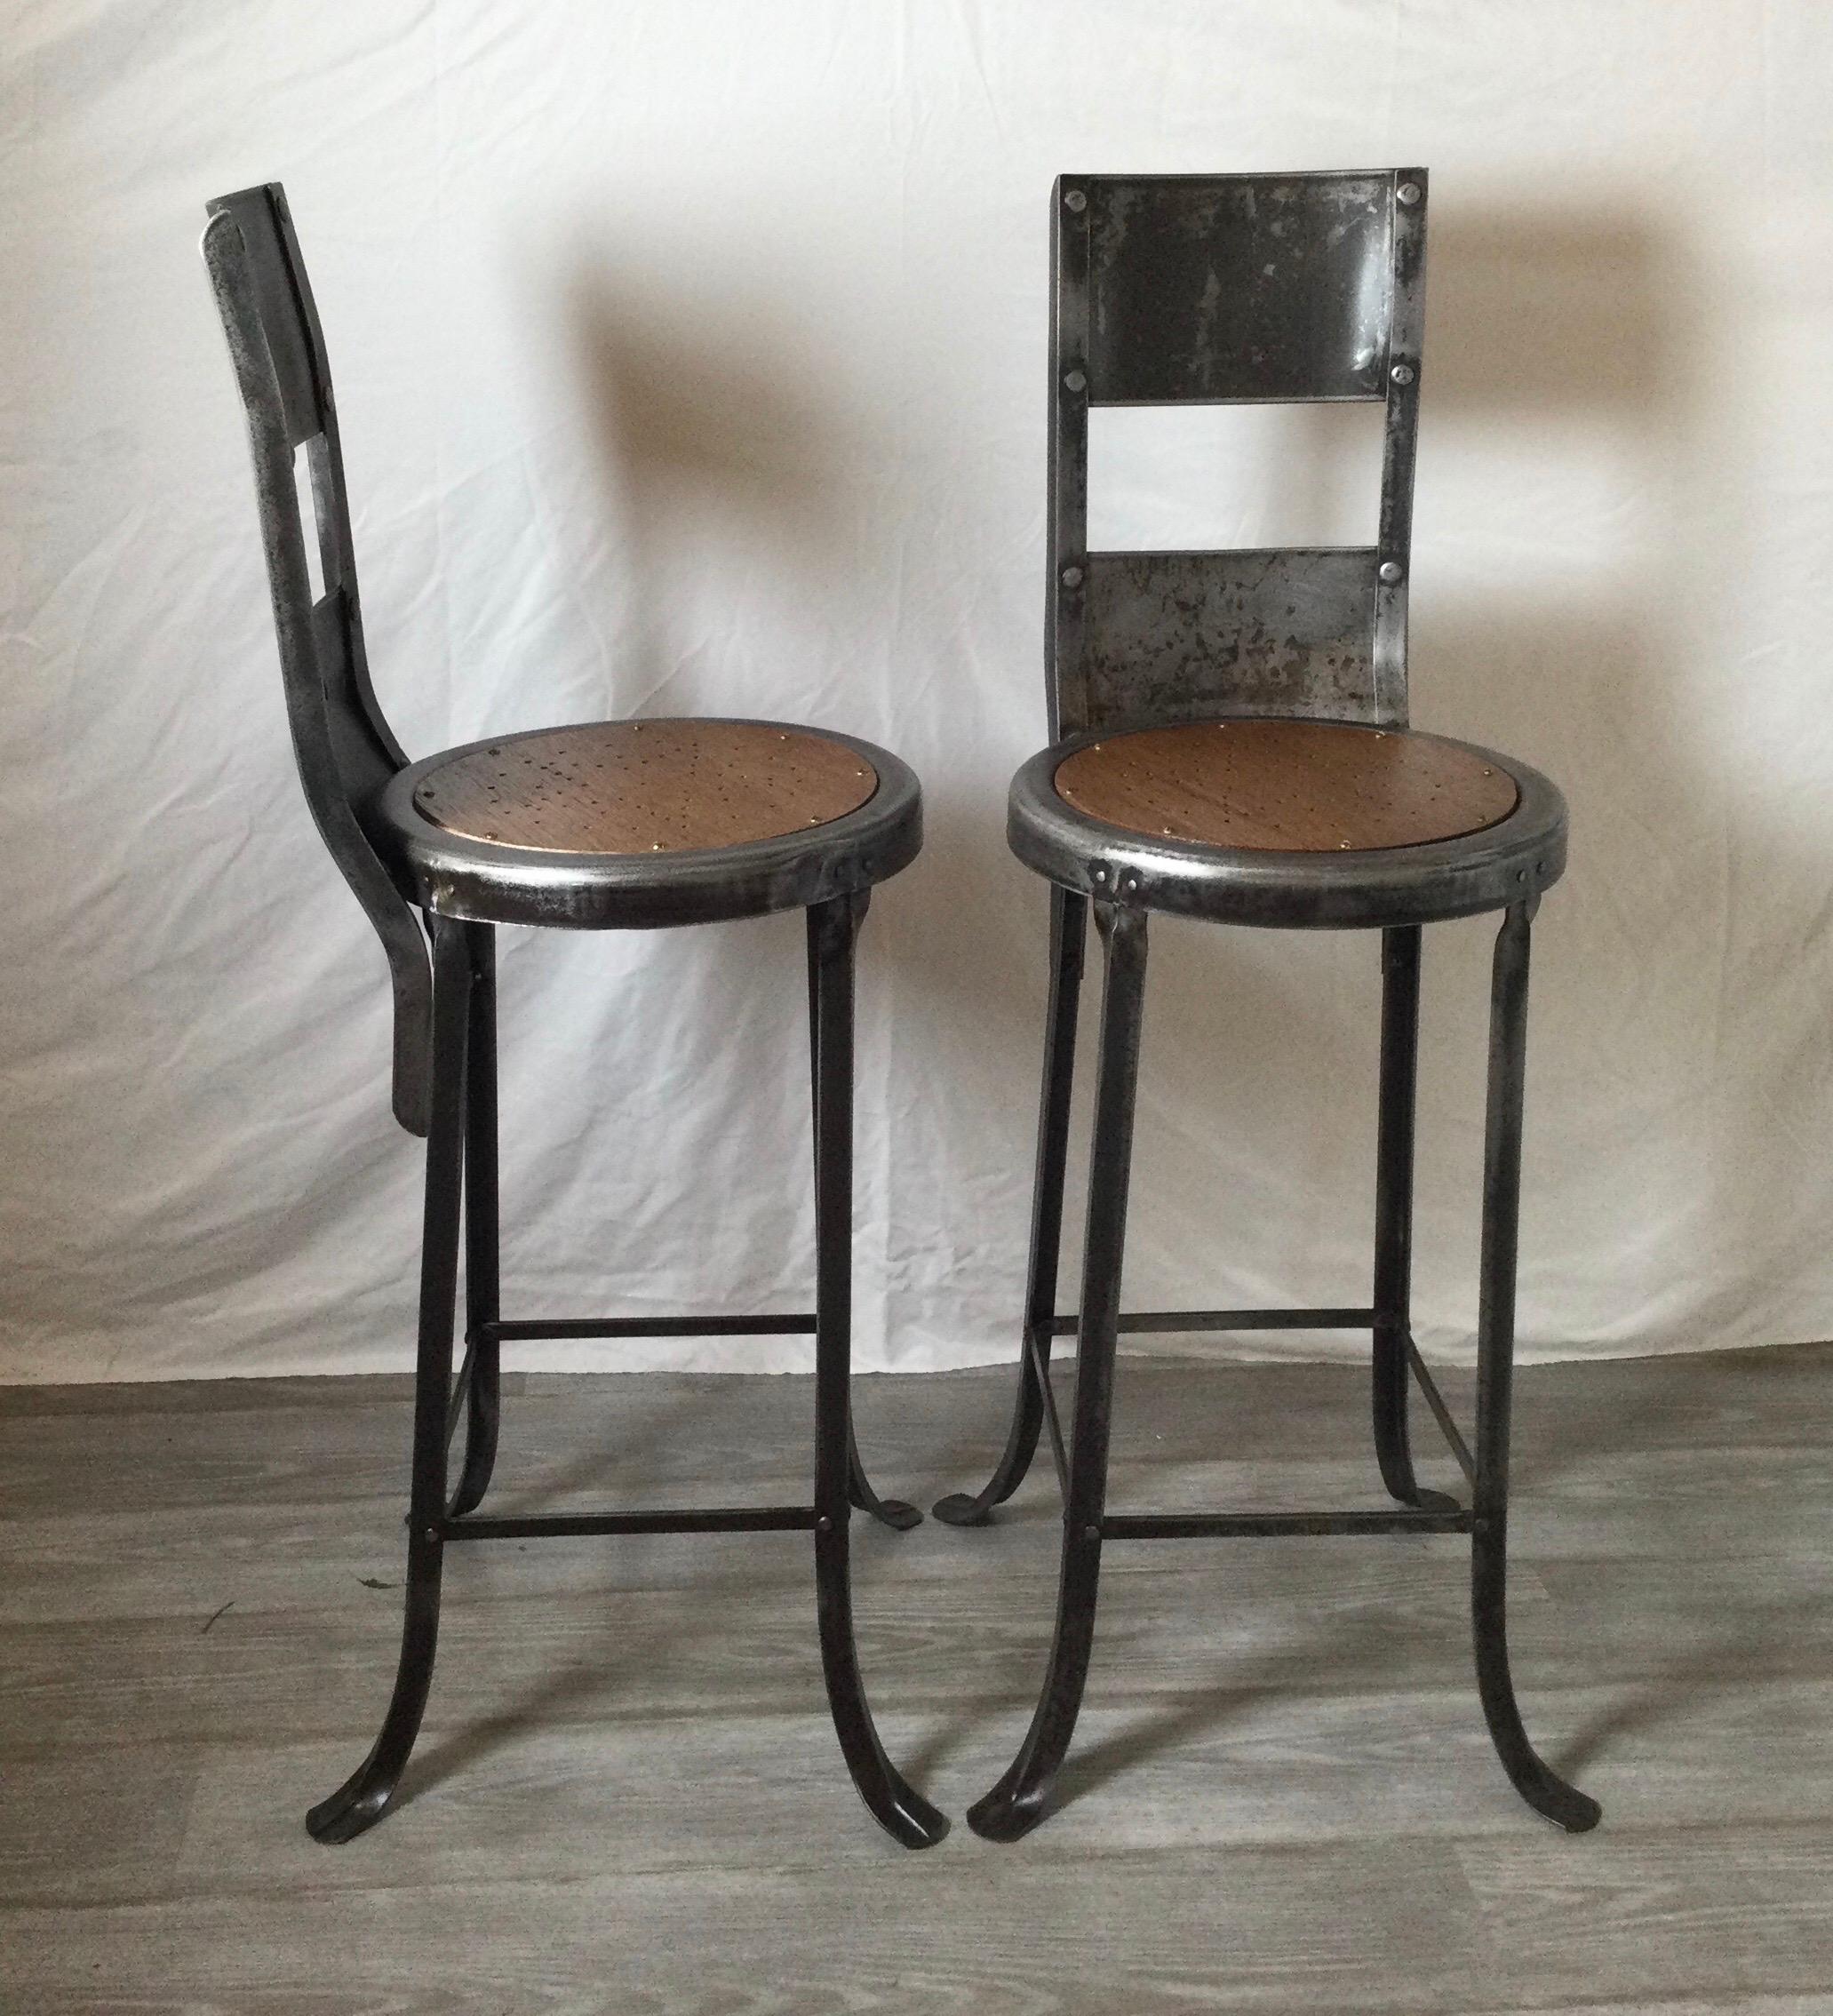 Mid-20th Century Unusual Pair of Early High Back Stools or Chairs